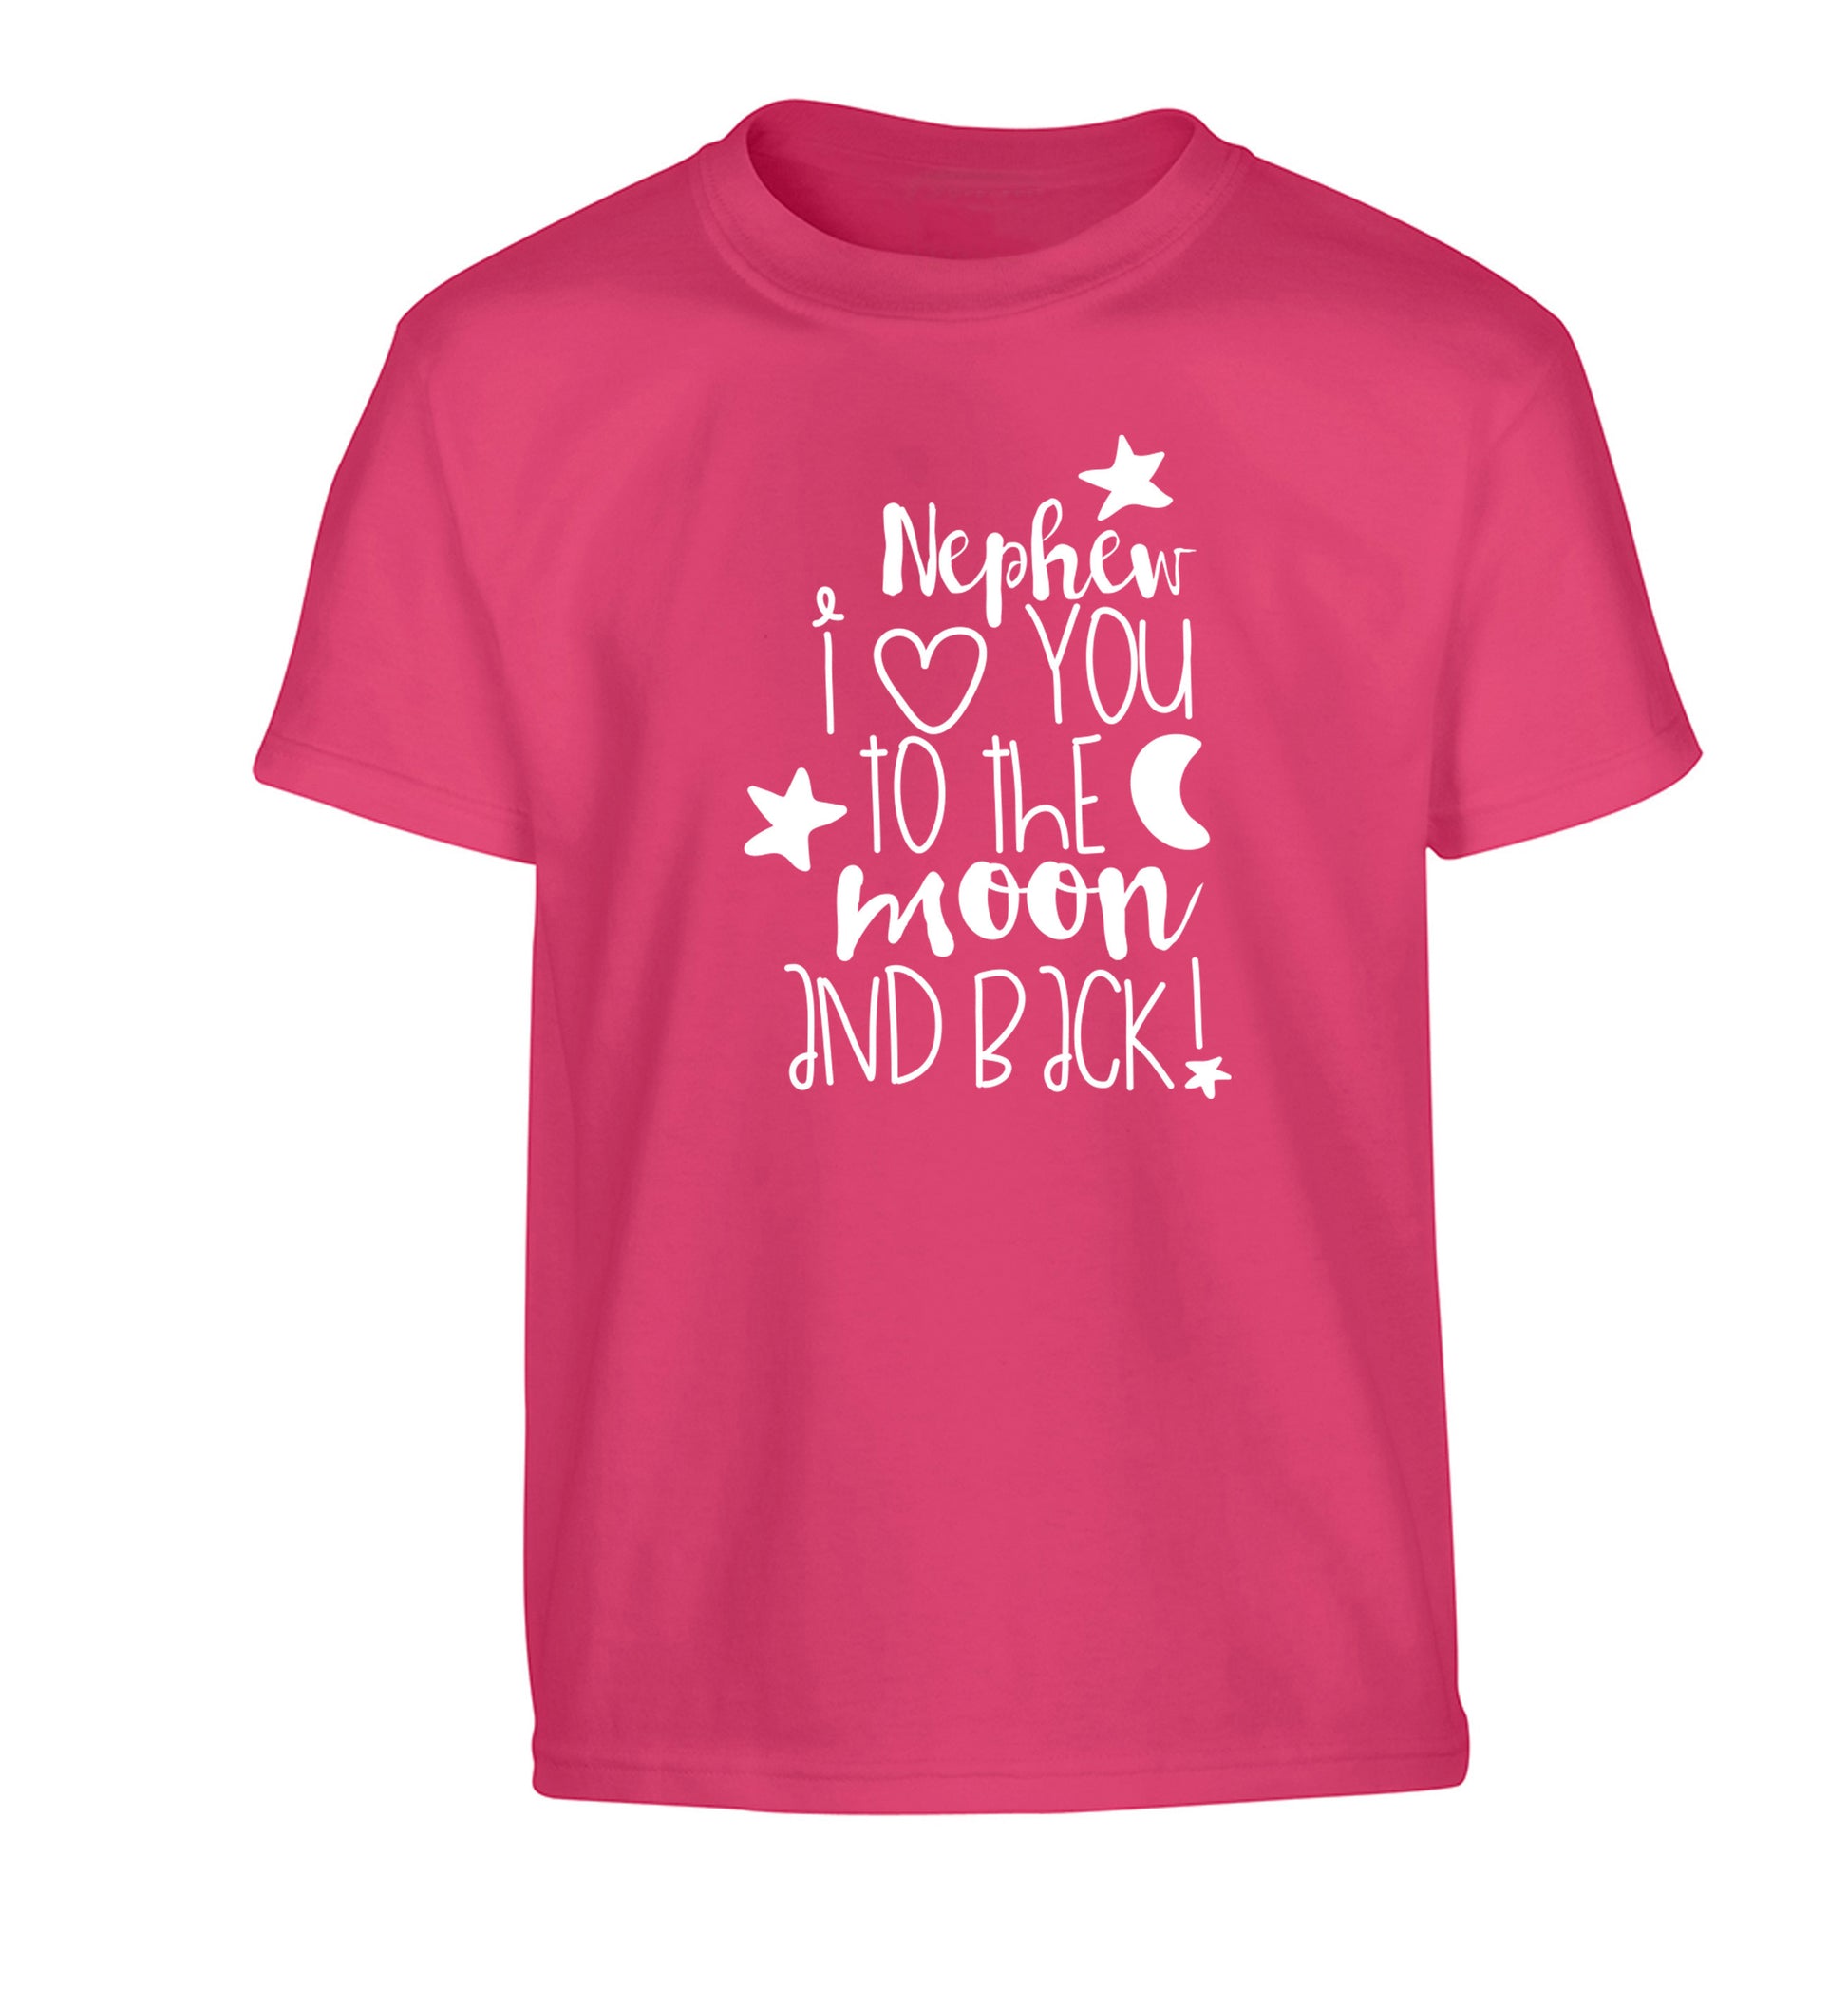 Nephew I love you to the moon and back Children's pink Tshirt 12-14 Years